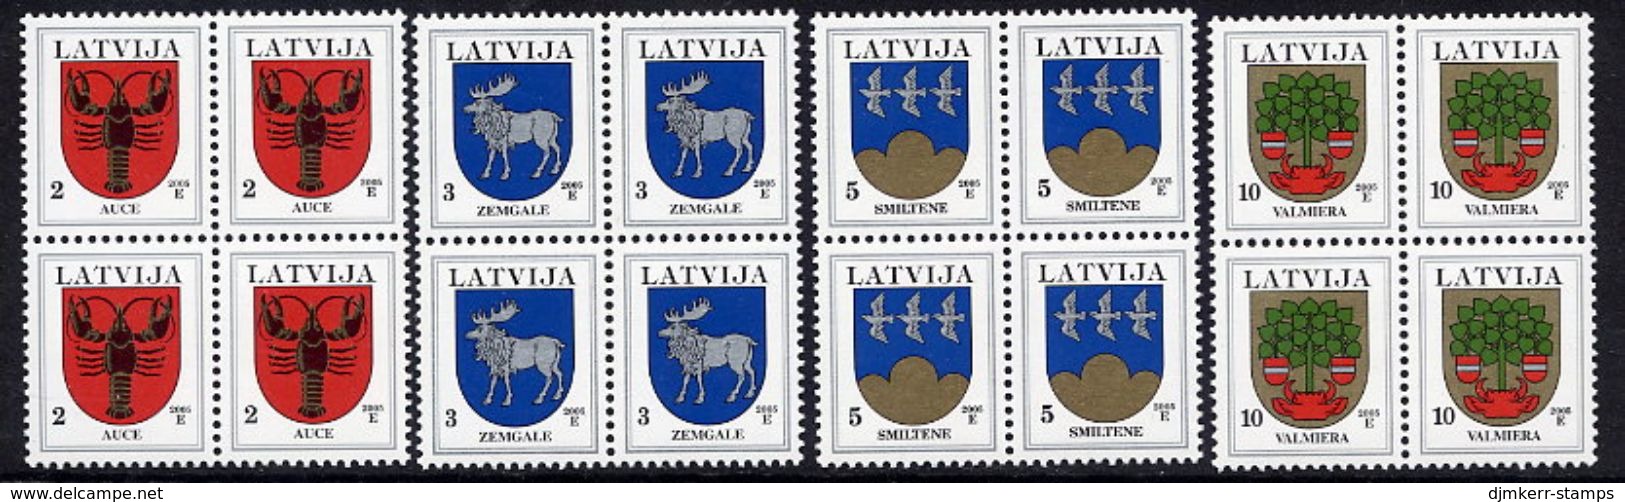 LATVIA 2005 Arms Definitives With Year Date 2005 In Blocks Of 4 MNH / **. - Lettland